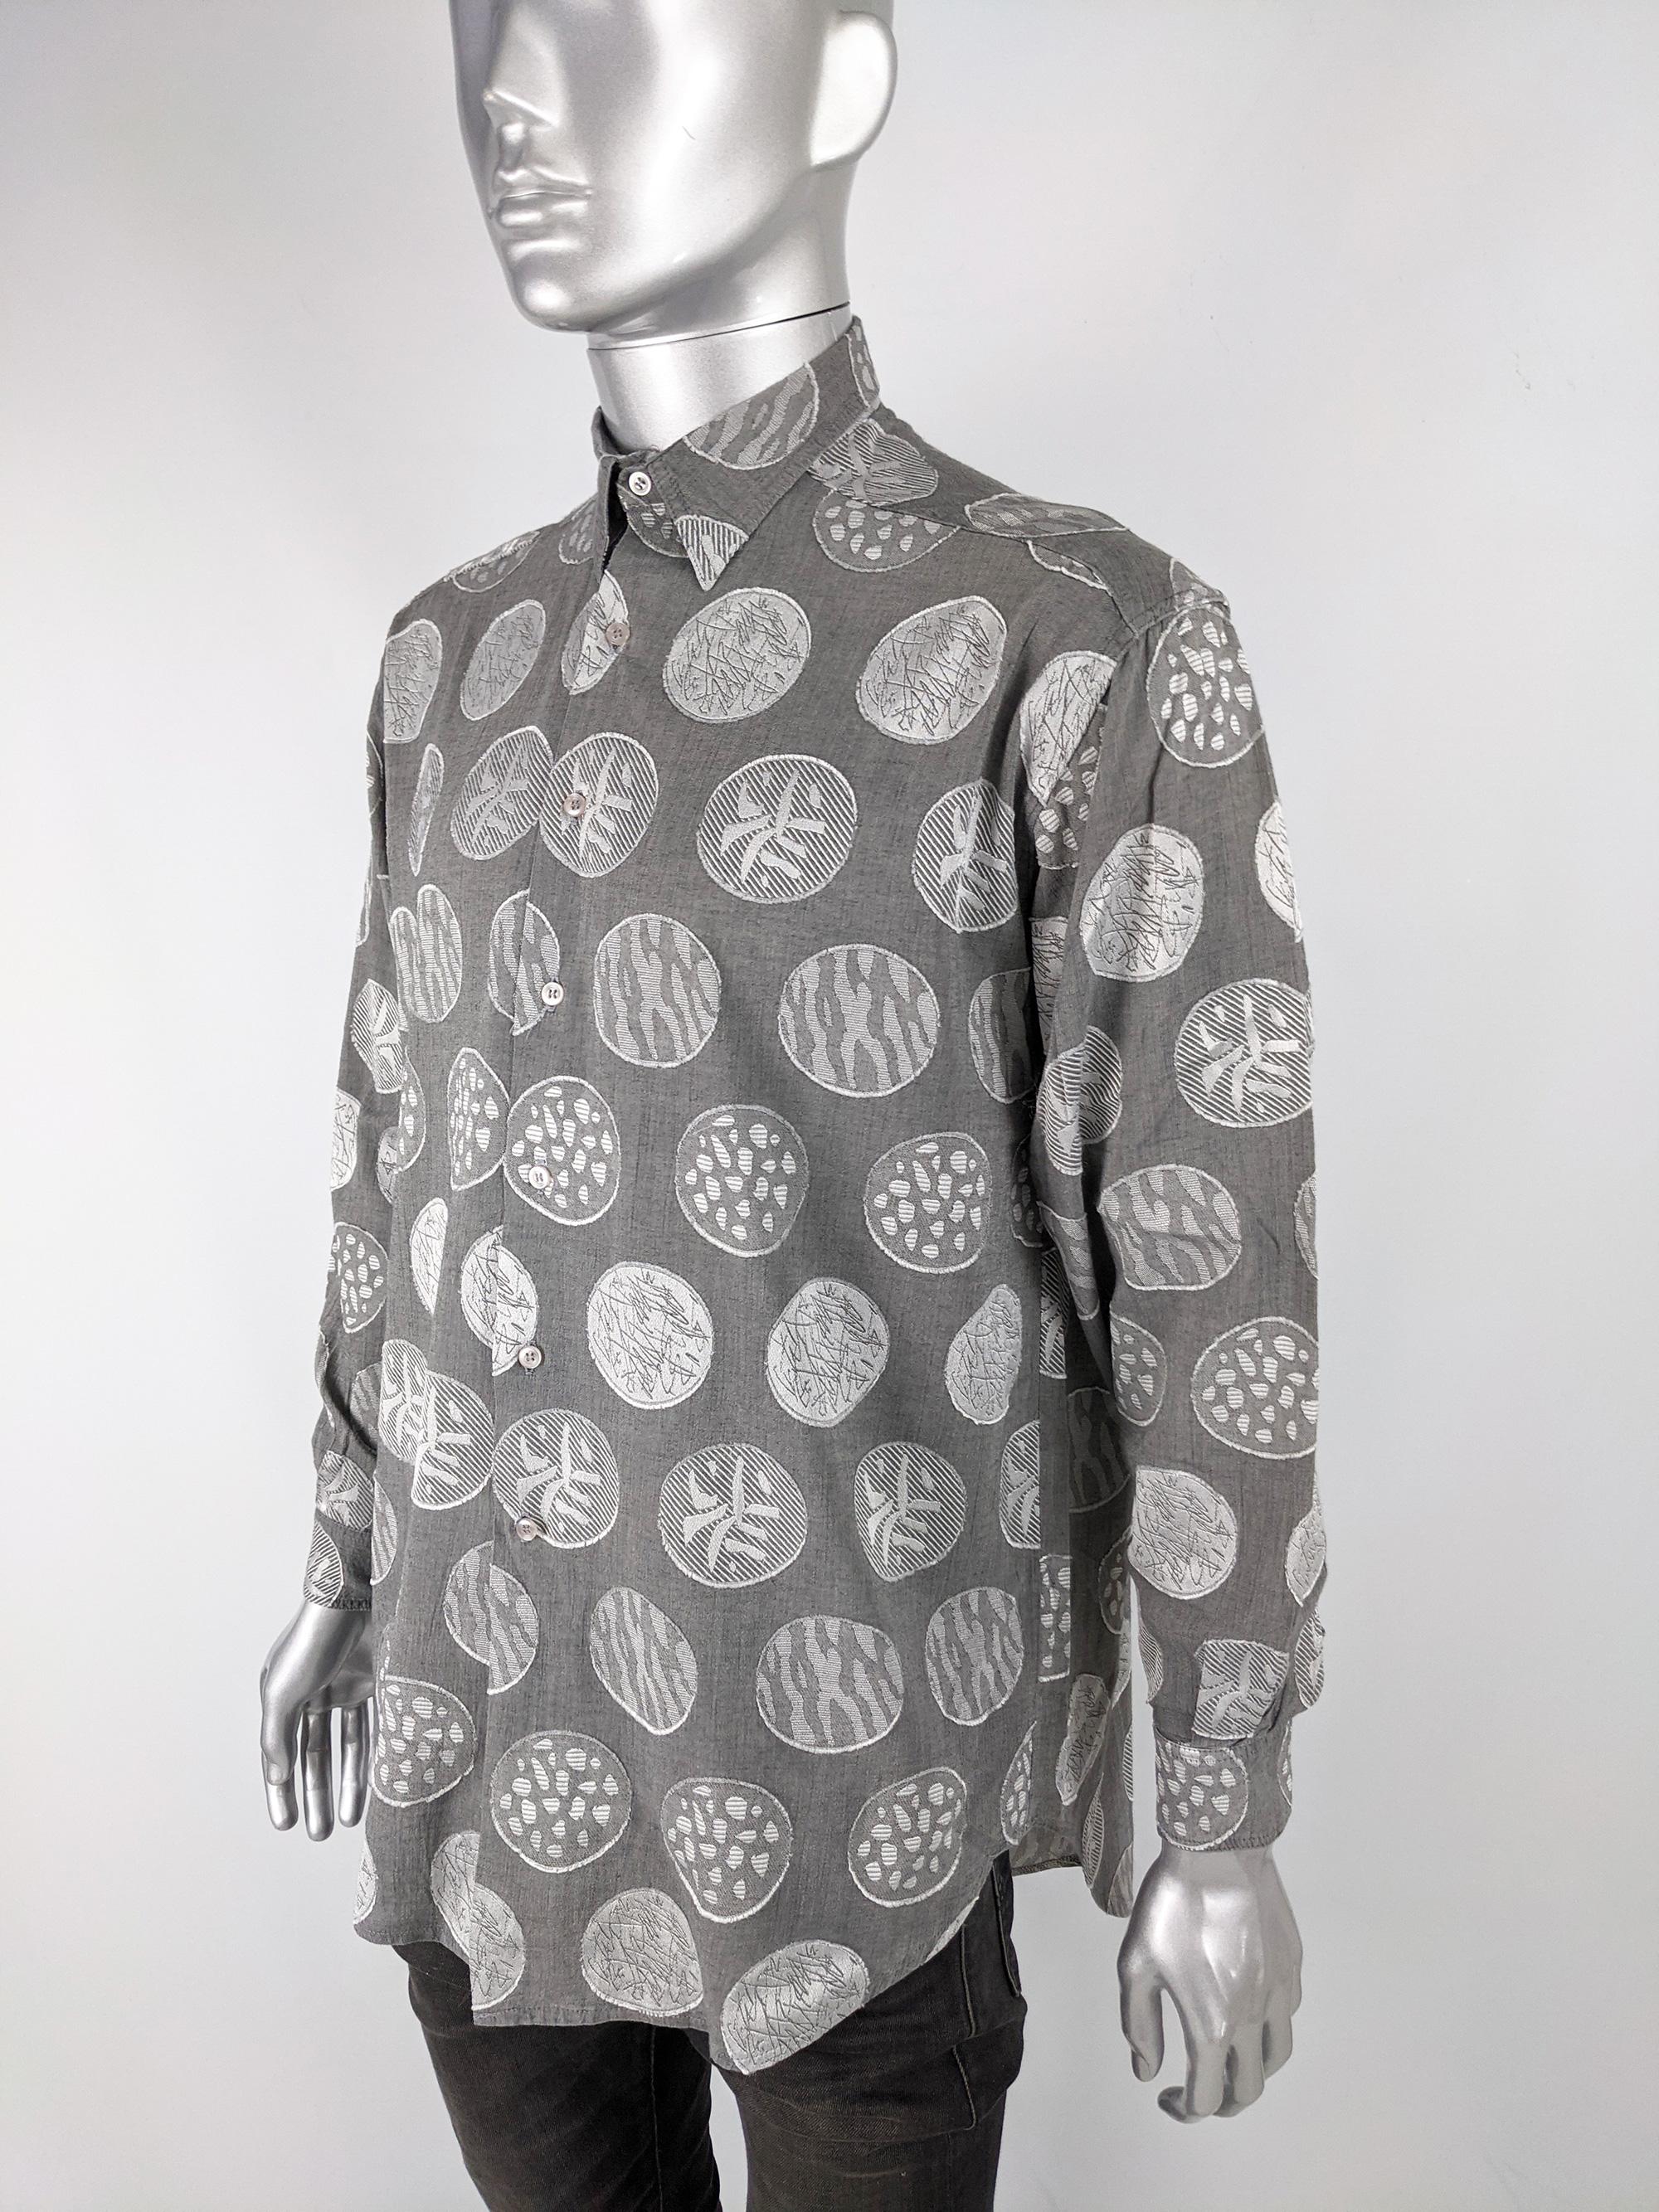 An amazing vintage mens long sleeve shirt from the 80s by cult Irish fashion designer, Stephen King, known for his incredible shirts. In a grey jacquard fabric with abstract patterns throughout. Perfect for a party or a bold look in the day. 

Size: